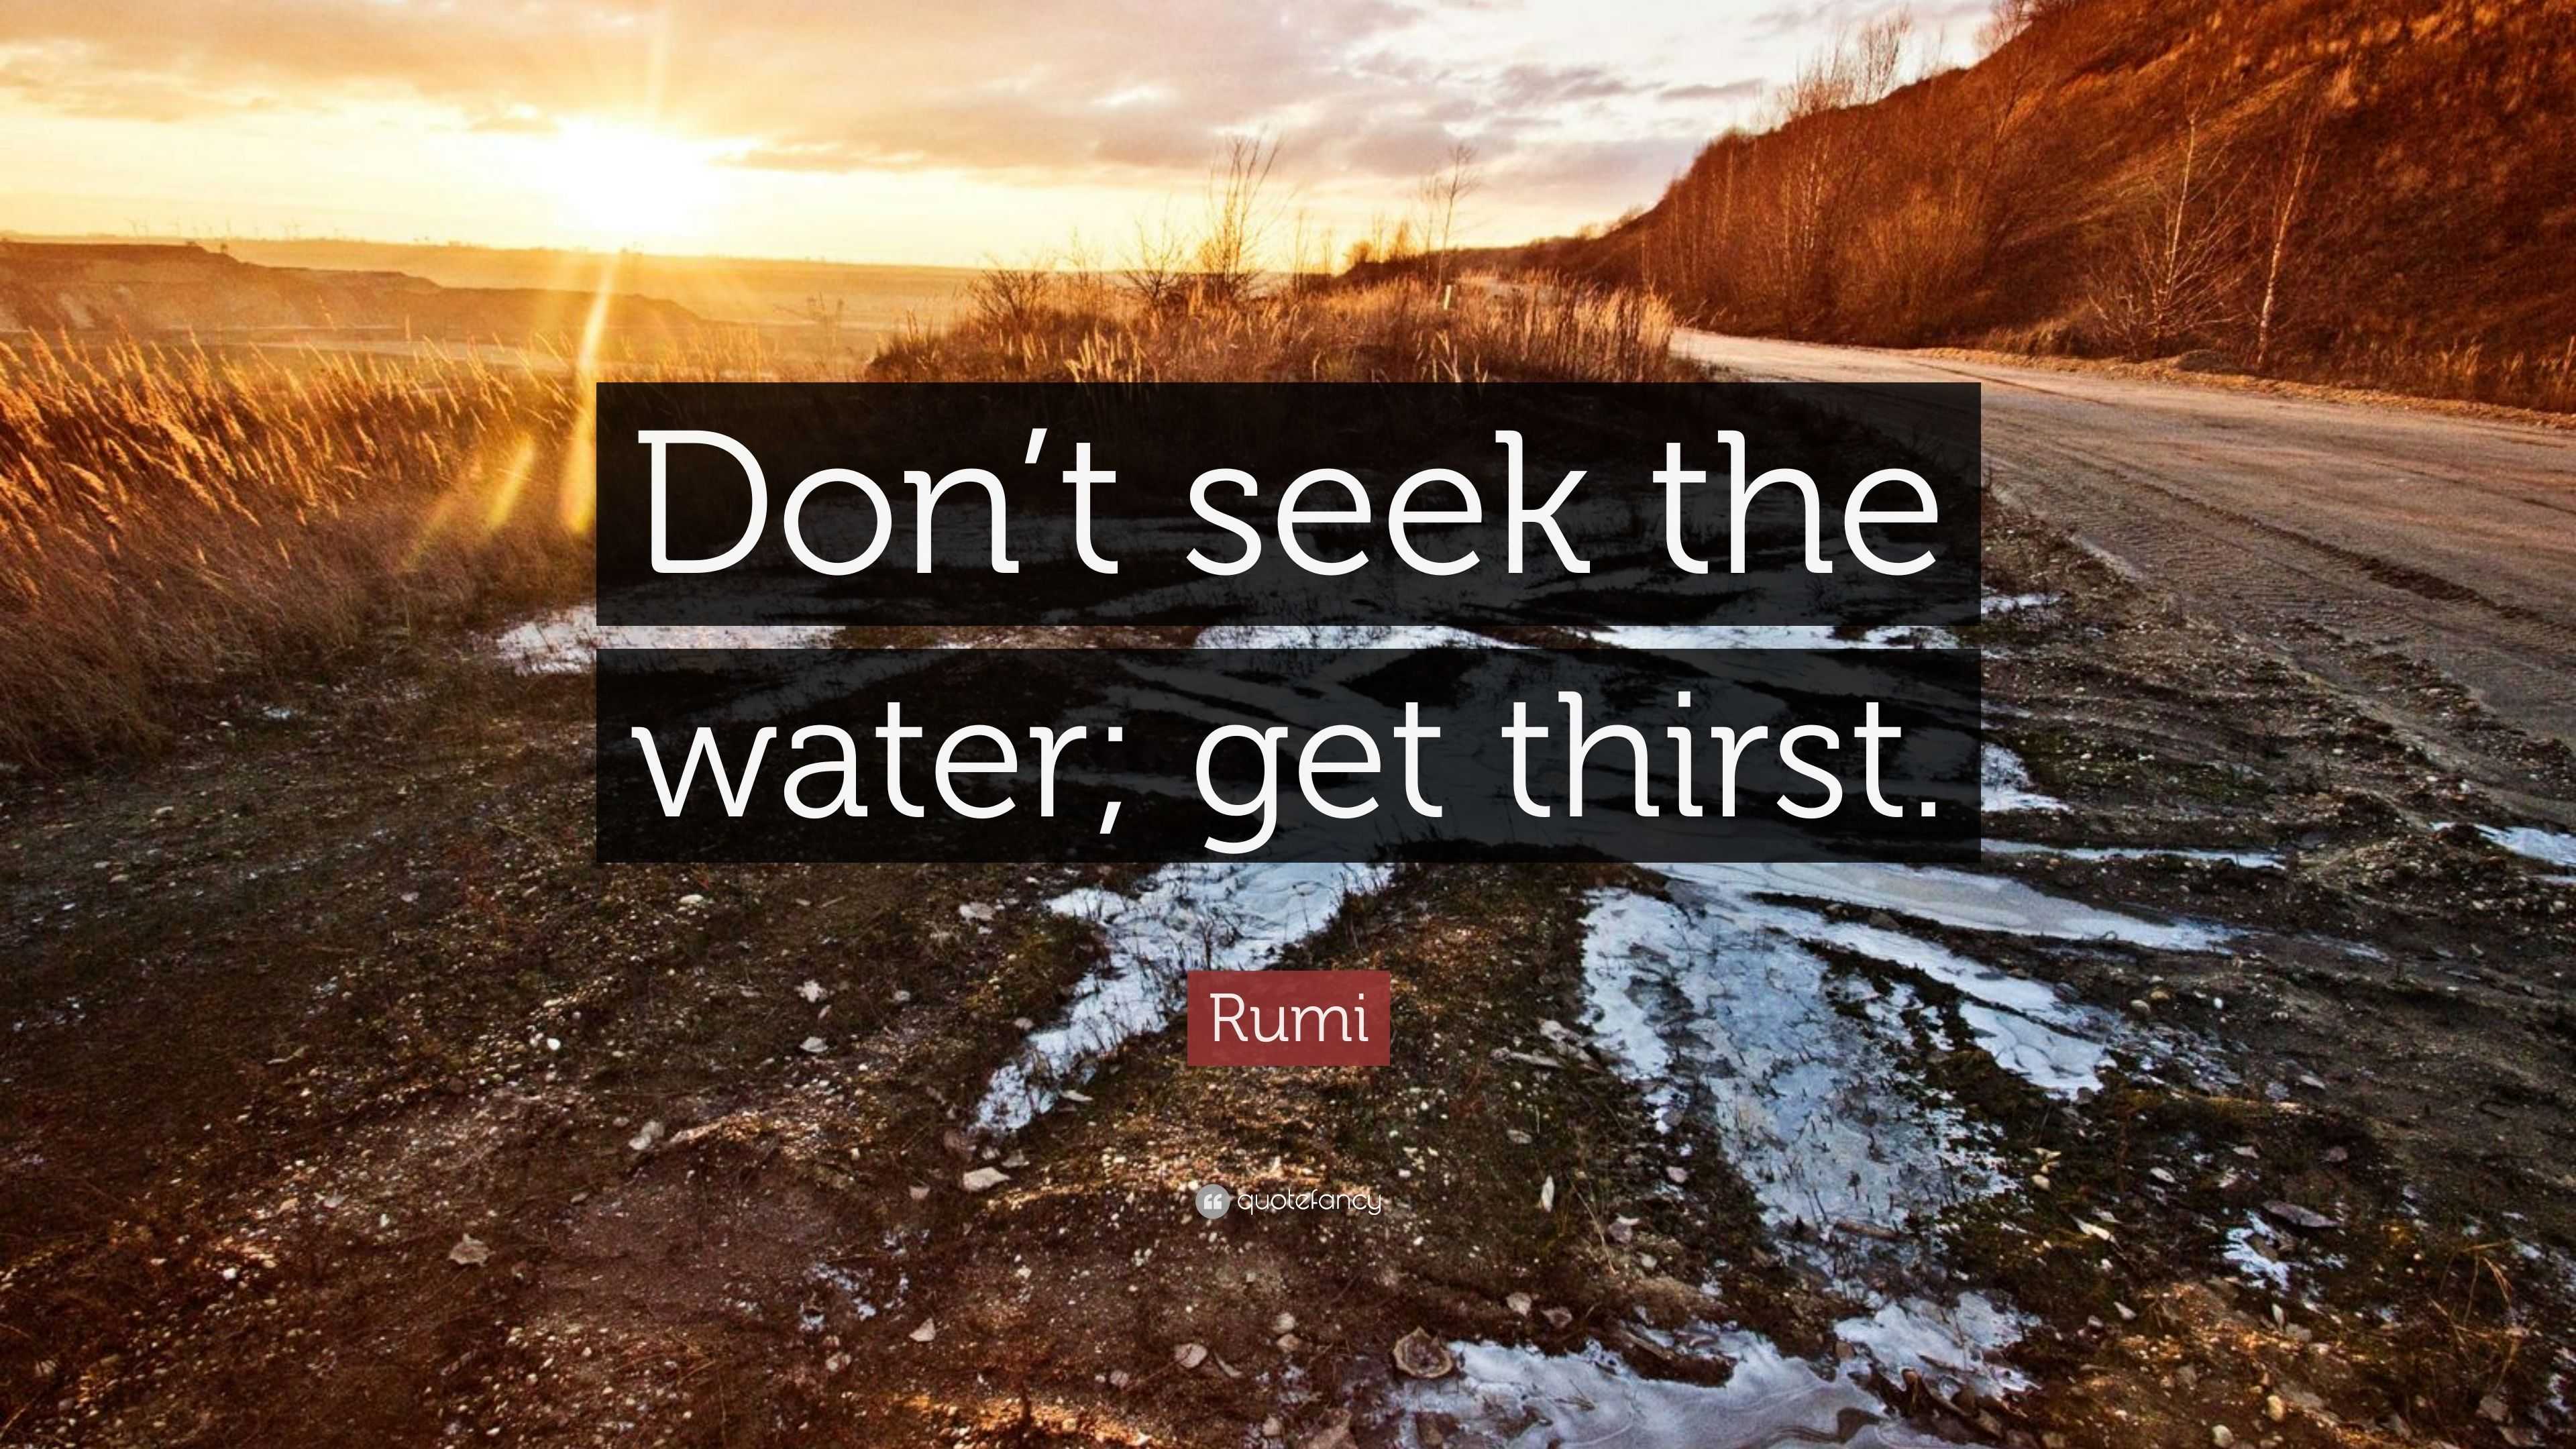 Rumi Quote “Don t seek the water thirst ”